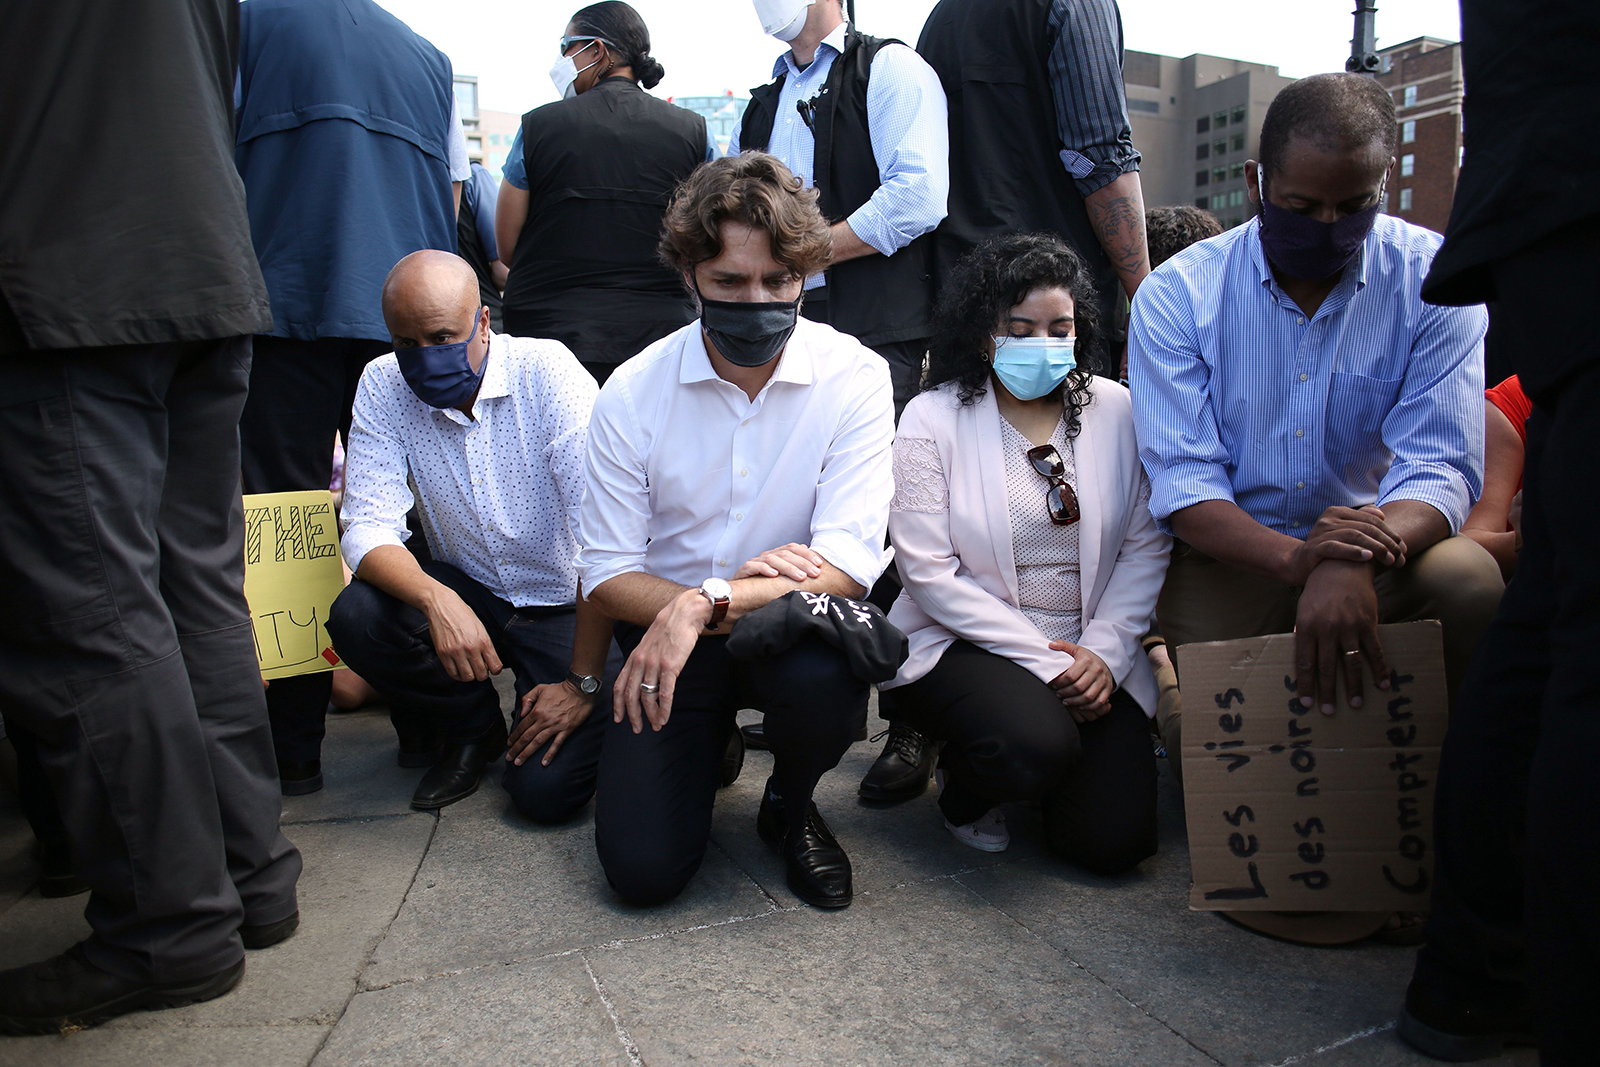 Canadian Prime Minister Justin Trudeau knelt in protest at the Black Lives Matter at Parliament Hill on June 5 in Ottawa, Canada.